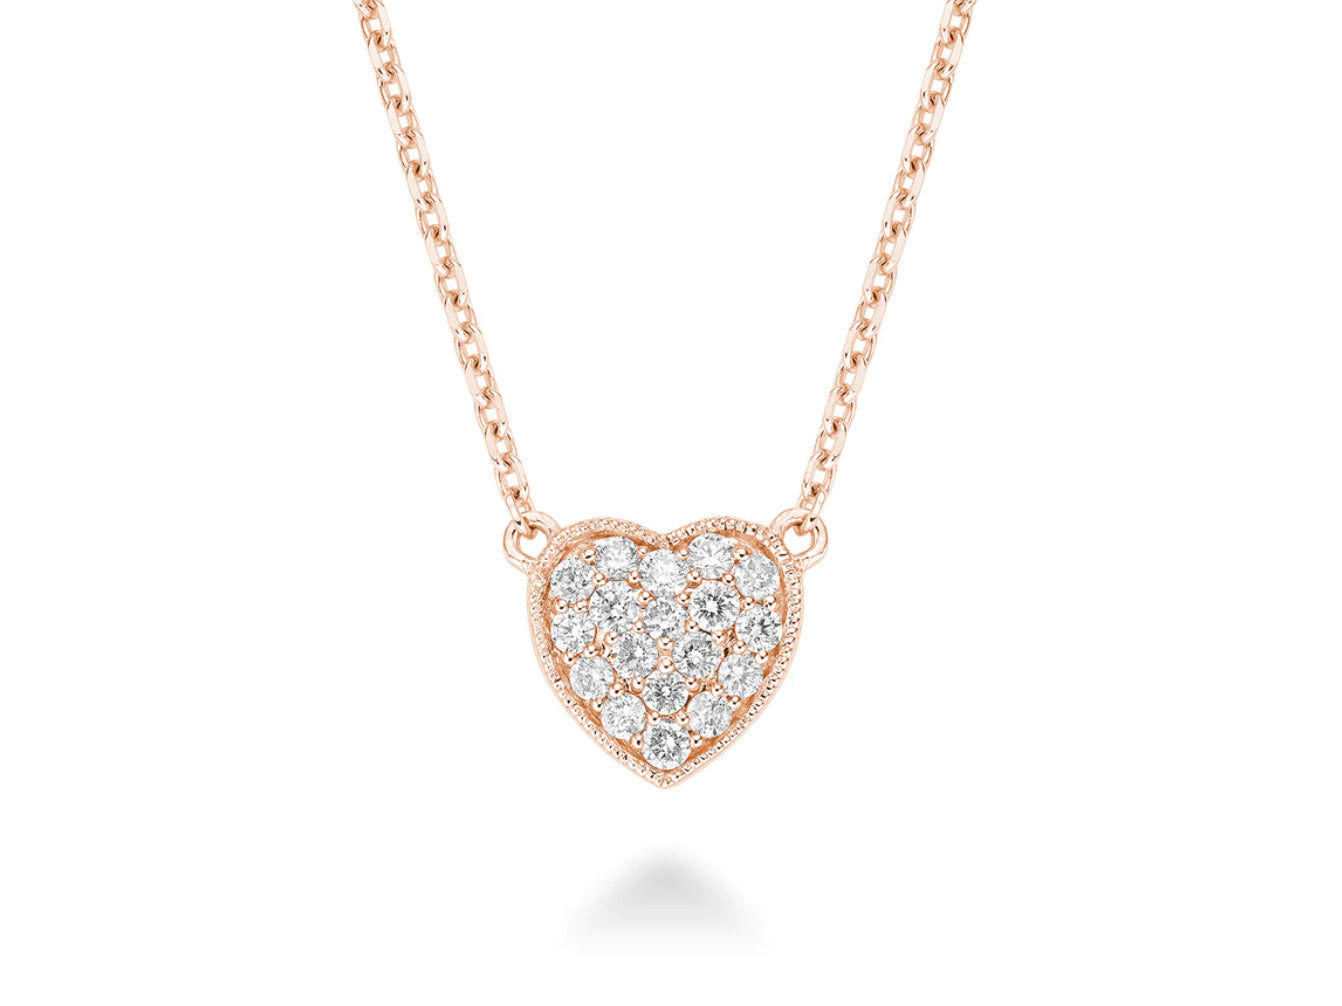 A close-up of a diamond heart necklace made of 14kt rose gold. The necklace features a heart-shaped pendant set with sparkling diamonds. The rose gold of the necklace is warm and feminine, making it a perfect choice for a woman who wants to add a touch of glamour to her look.